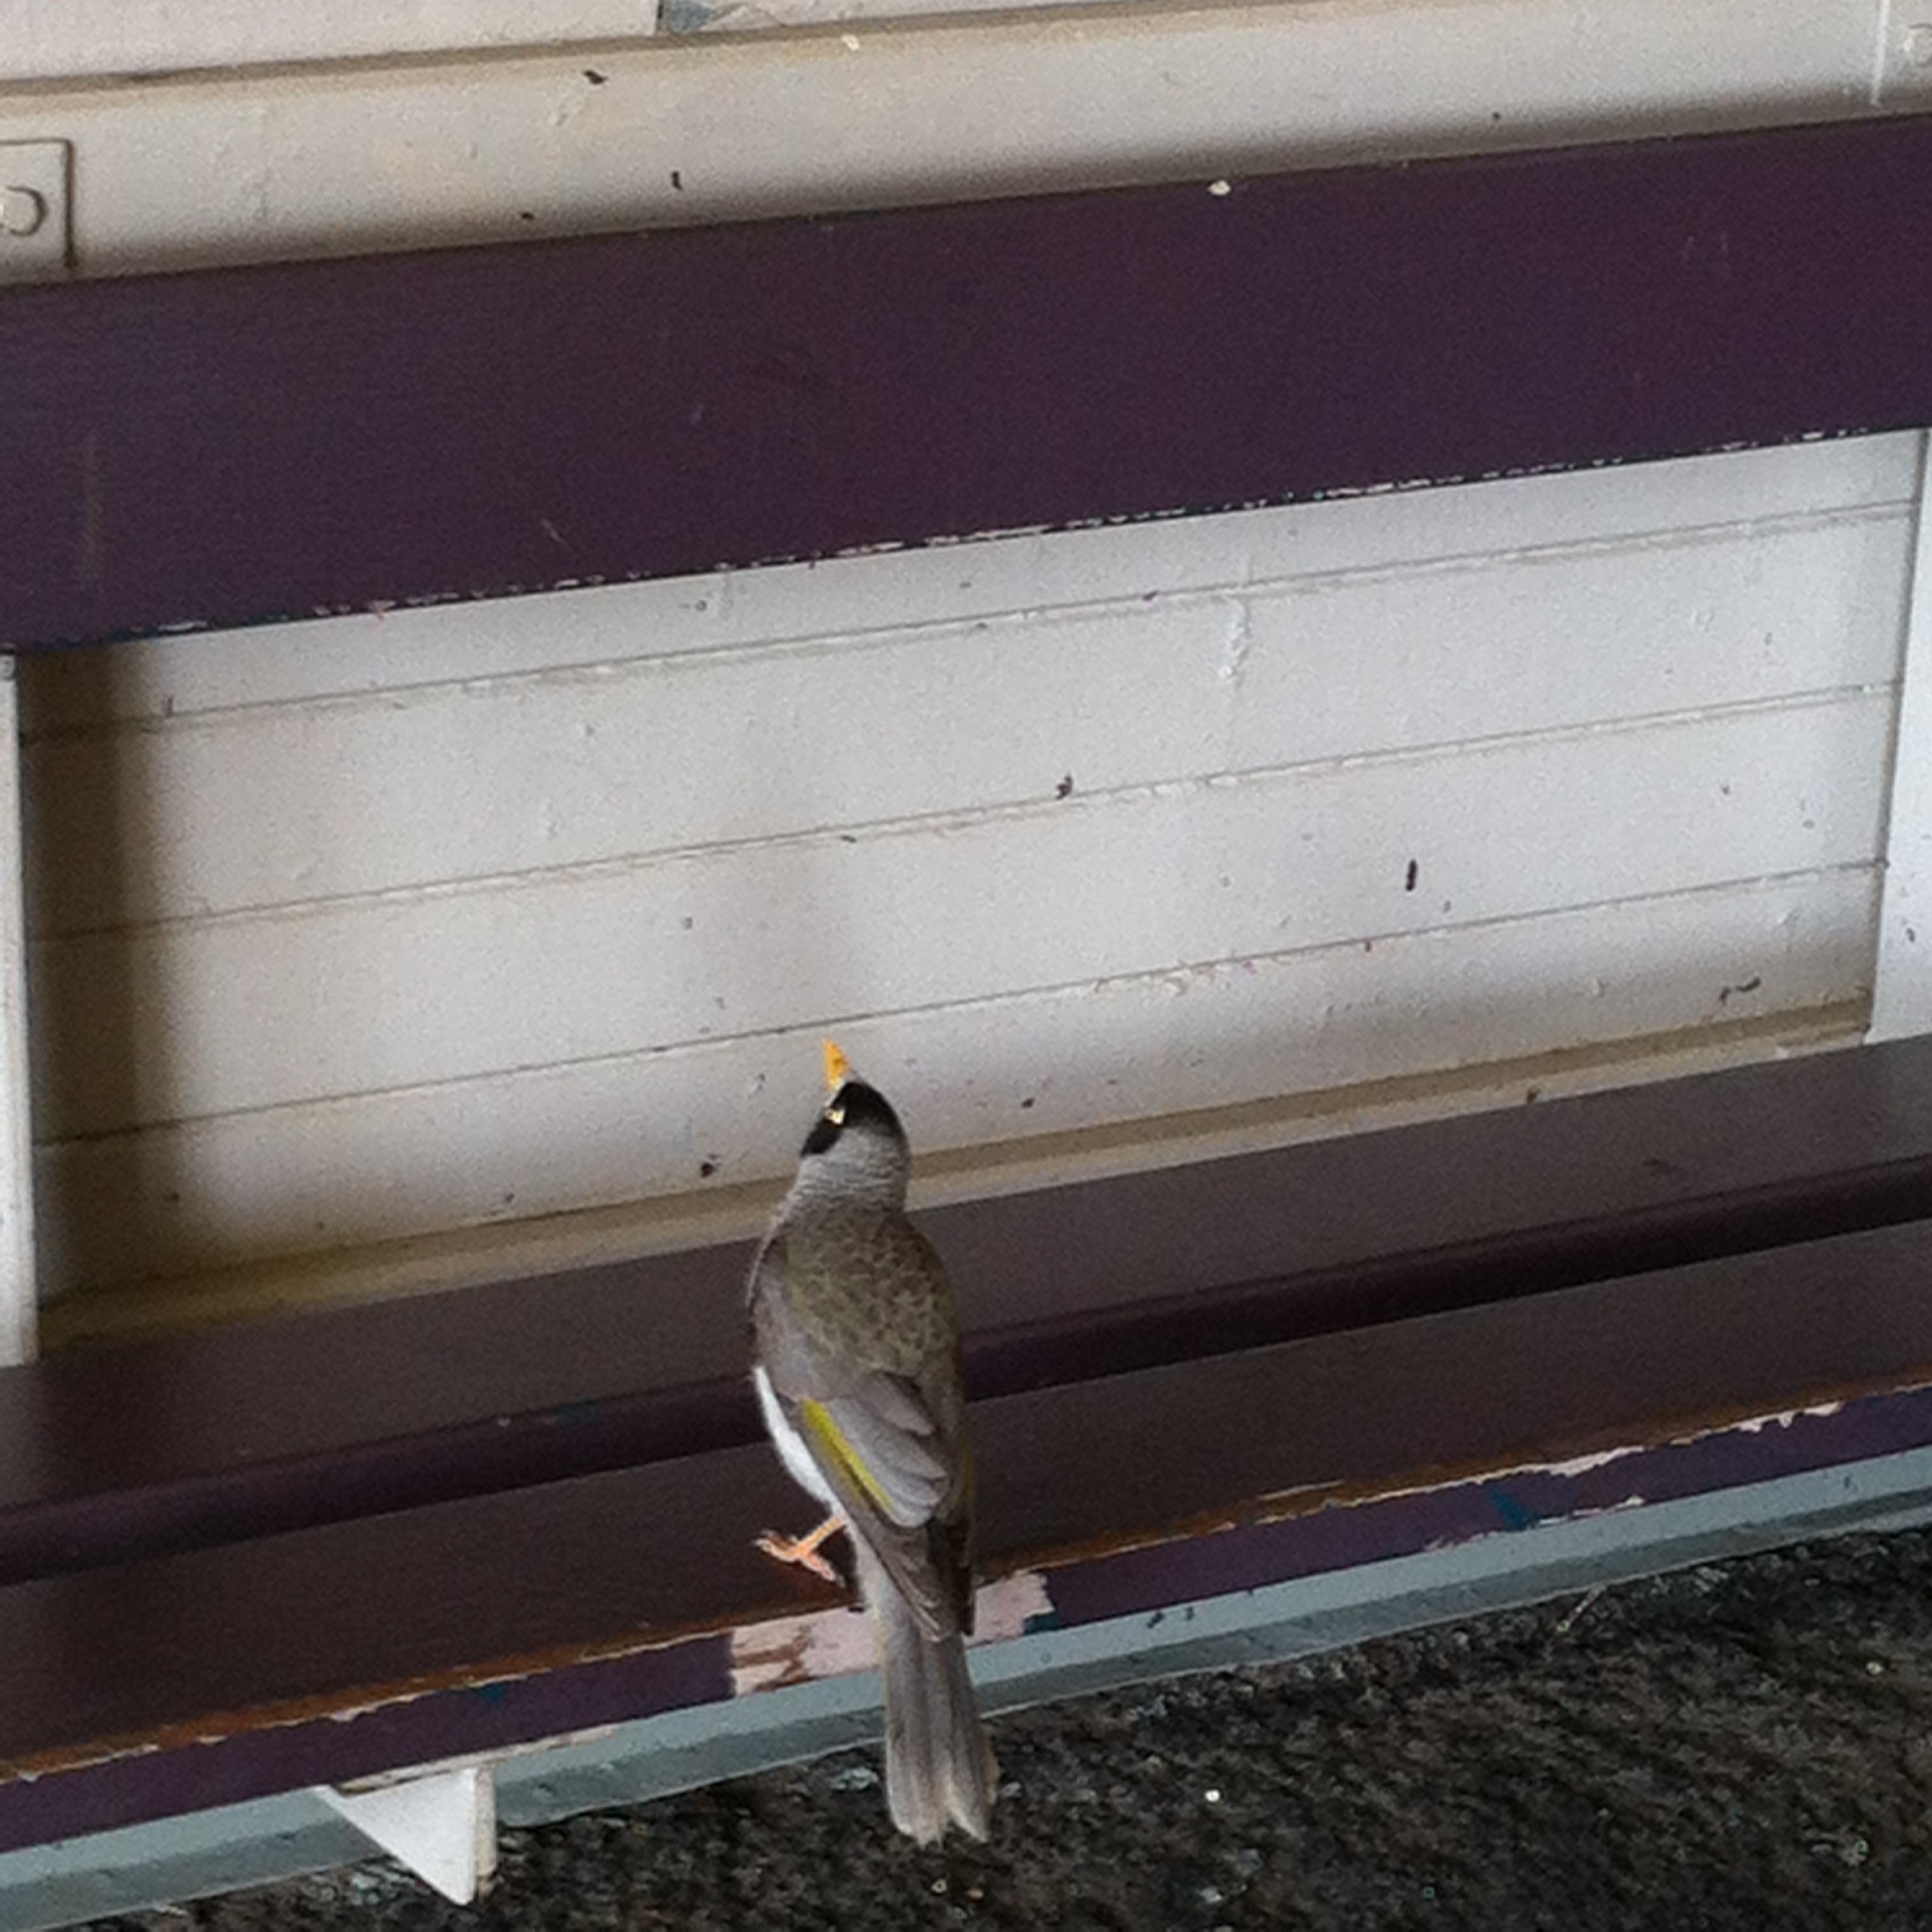 Noisy miner in the waiting room